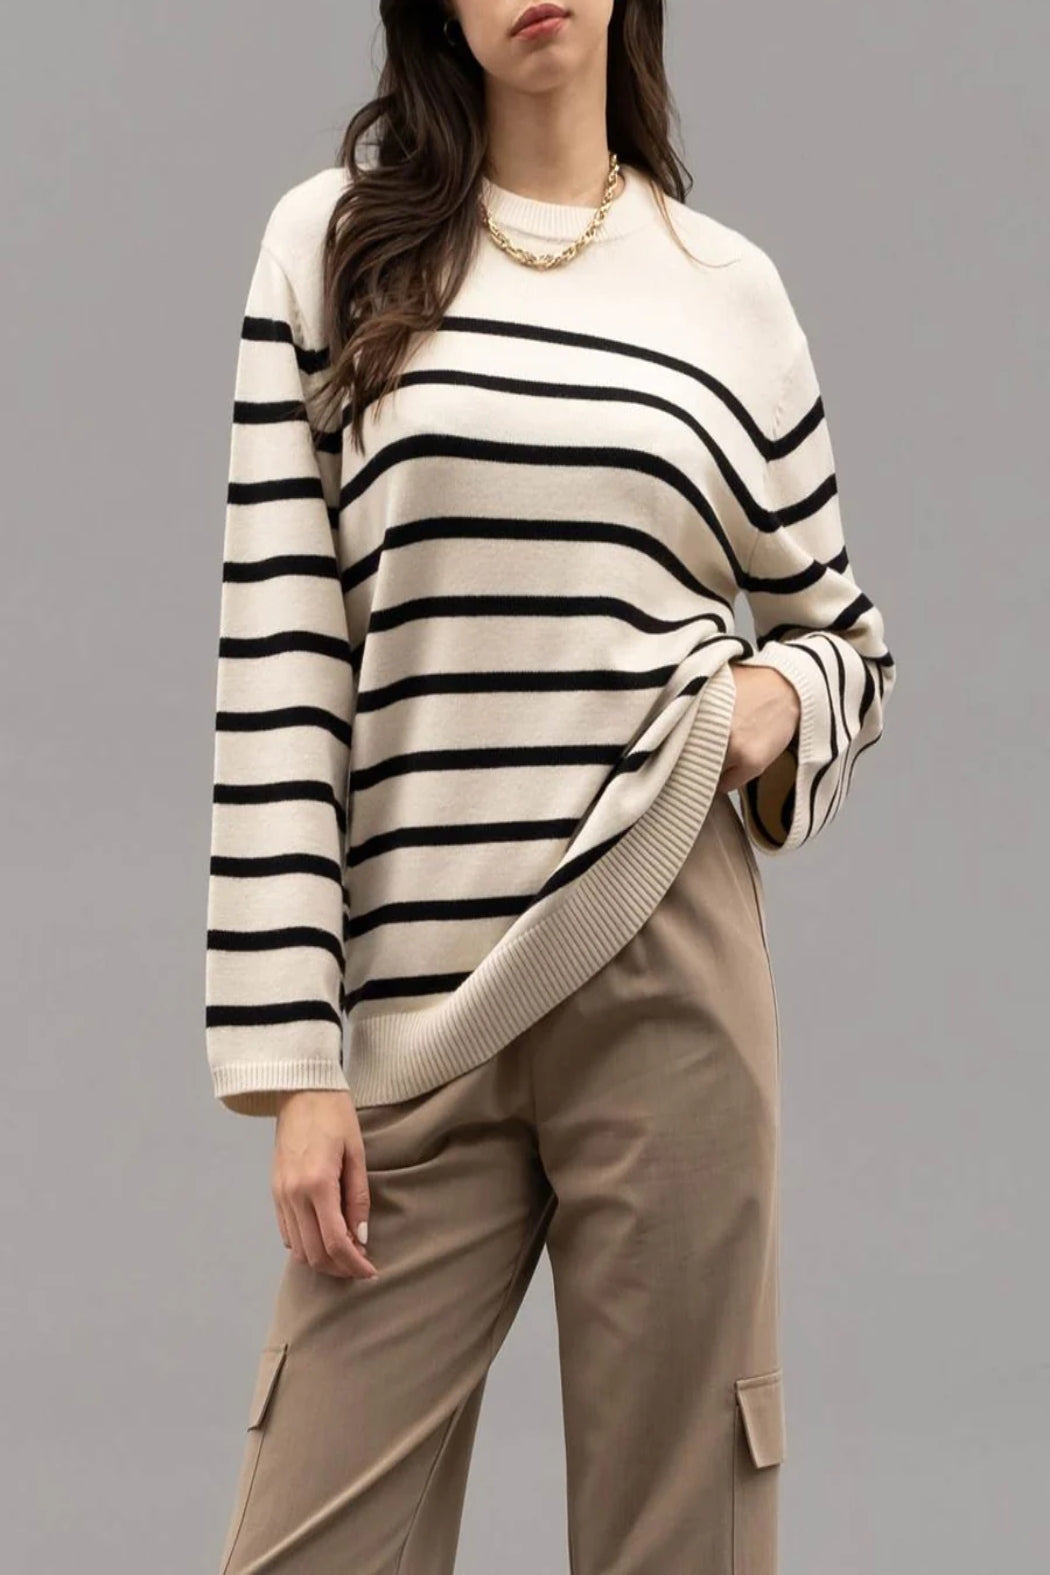 Always Forever Striped Knit Sweater Top